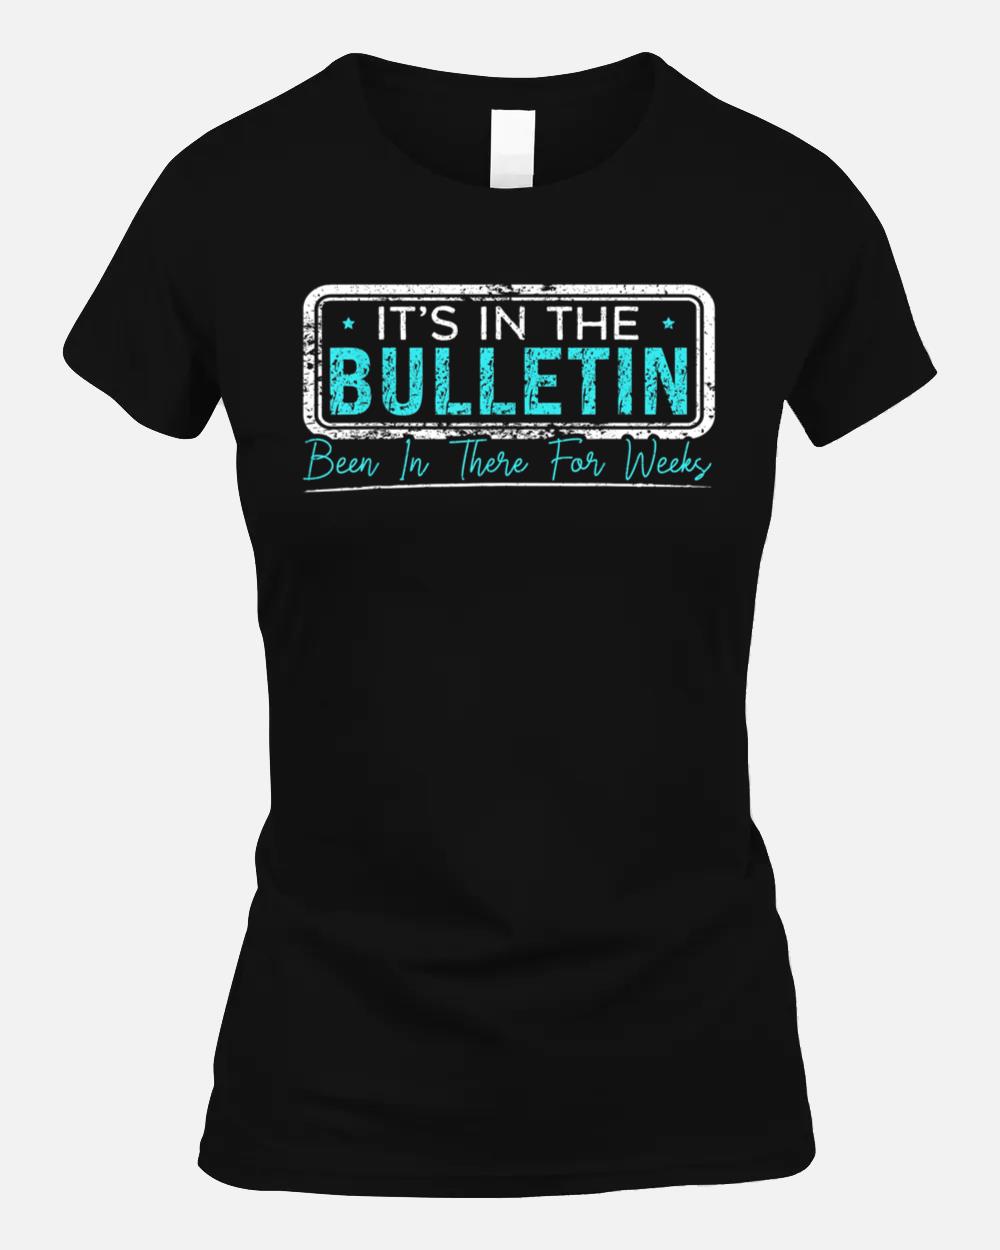 It's In The Bulletin Been In There For Weeks Trending Pun Unisex T-Shirt